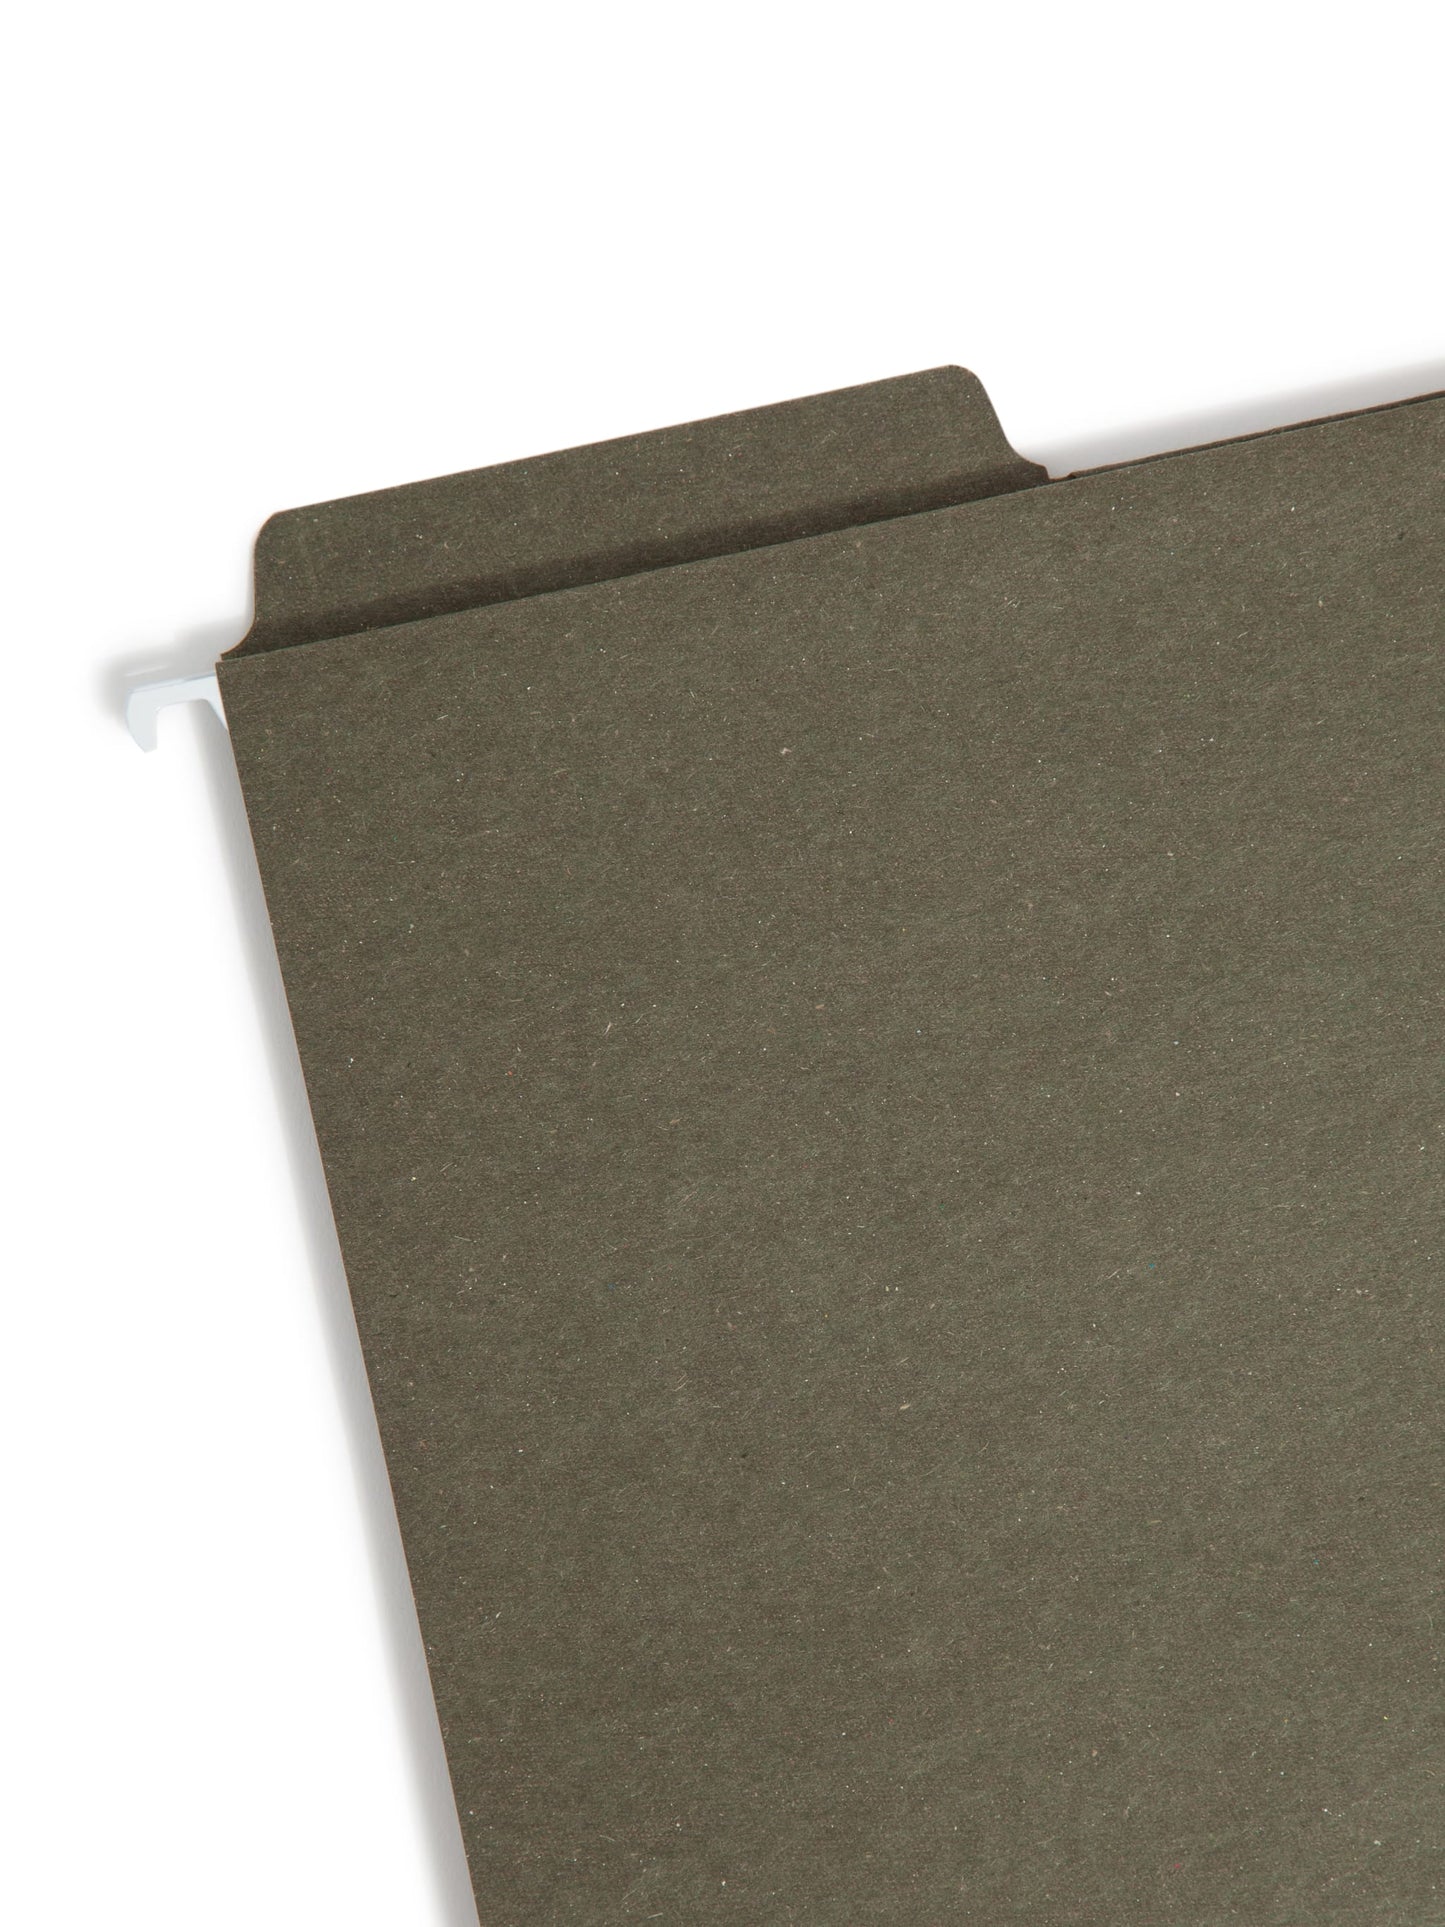 100% Recycled FasTab® Hanging File Folders, Standard Green Color, Letter Size, Set of 20, 086486640374